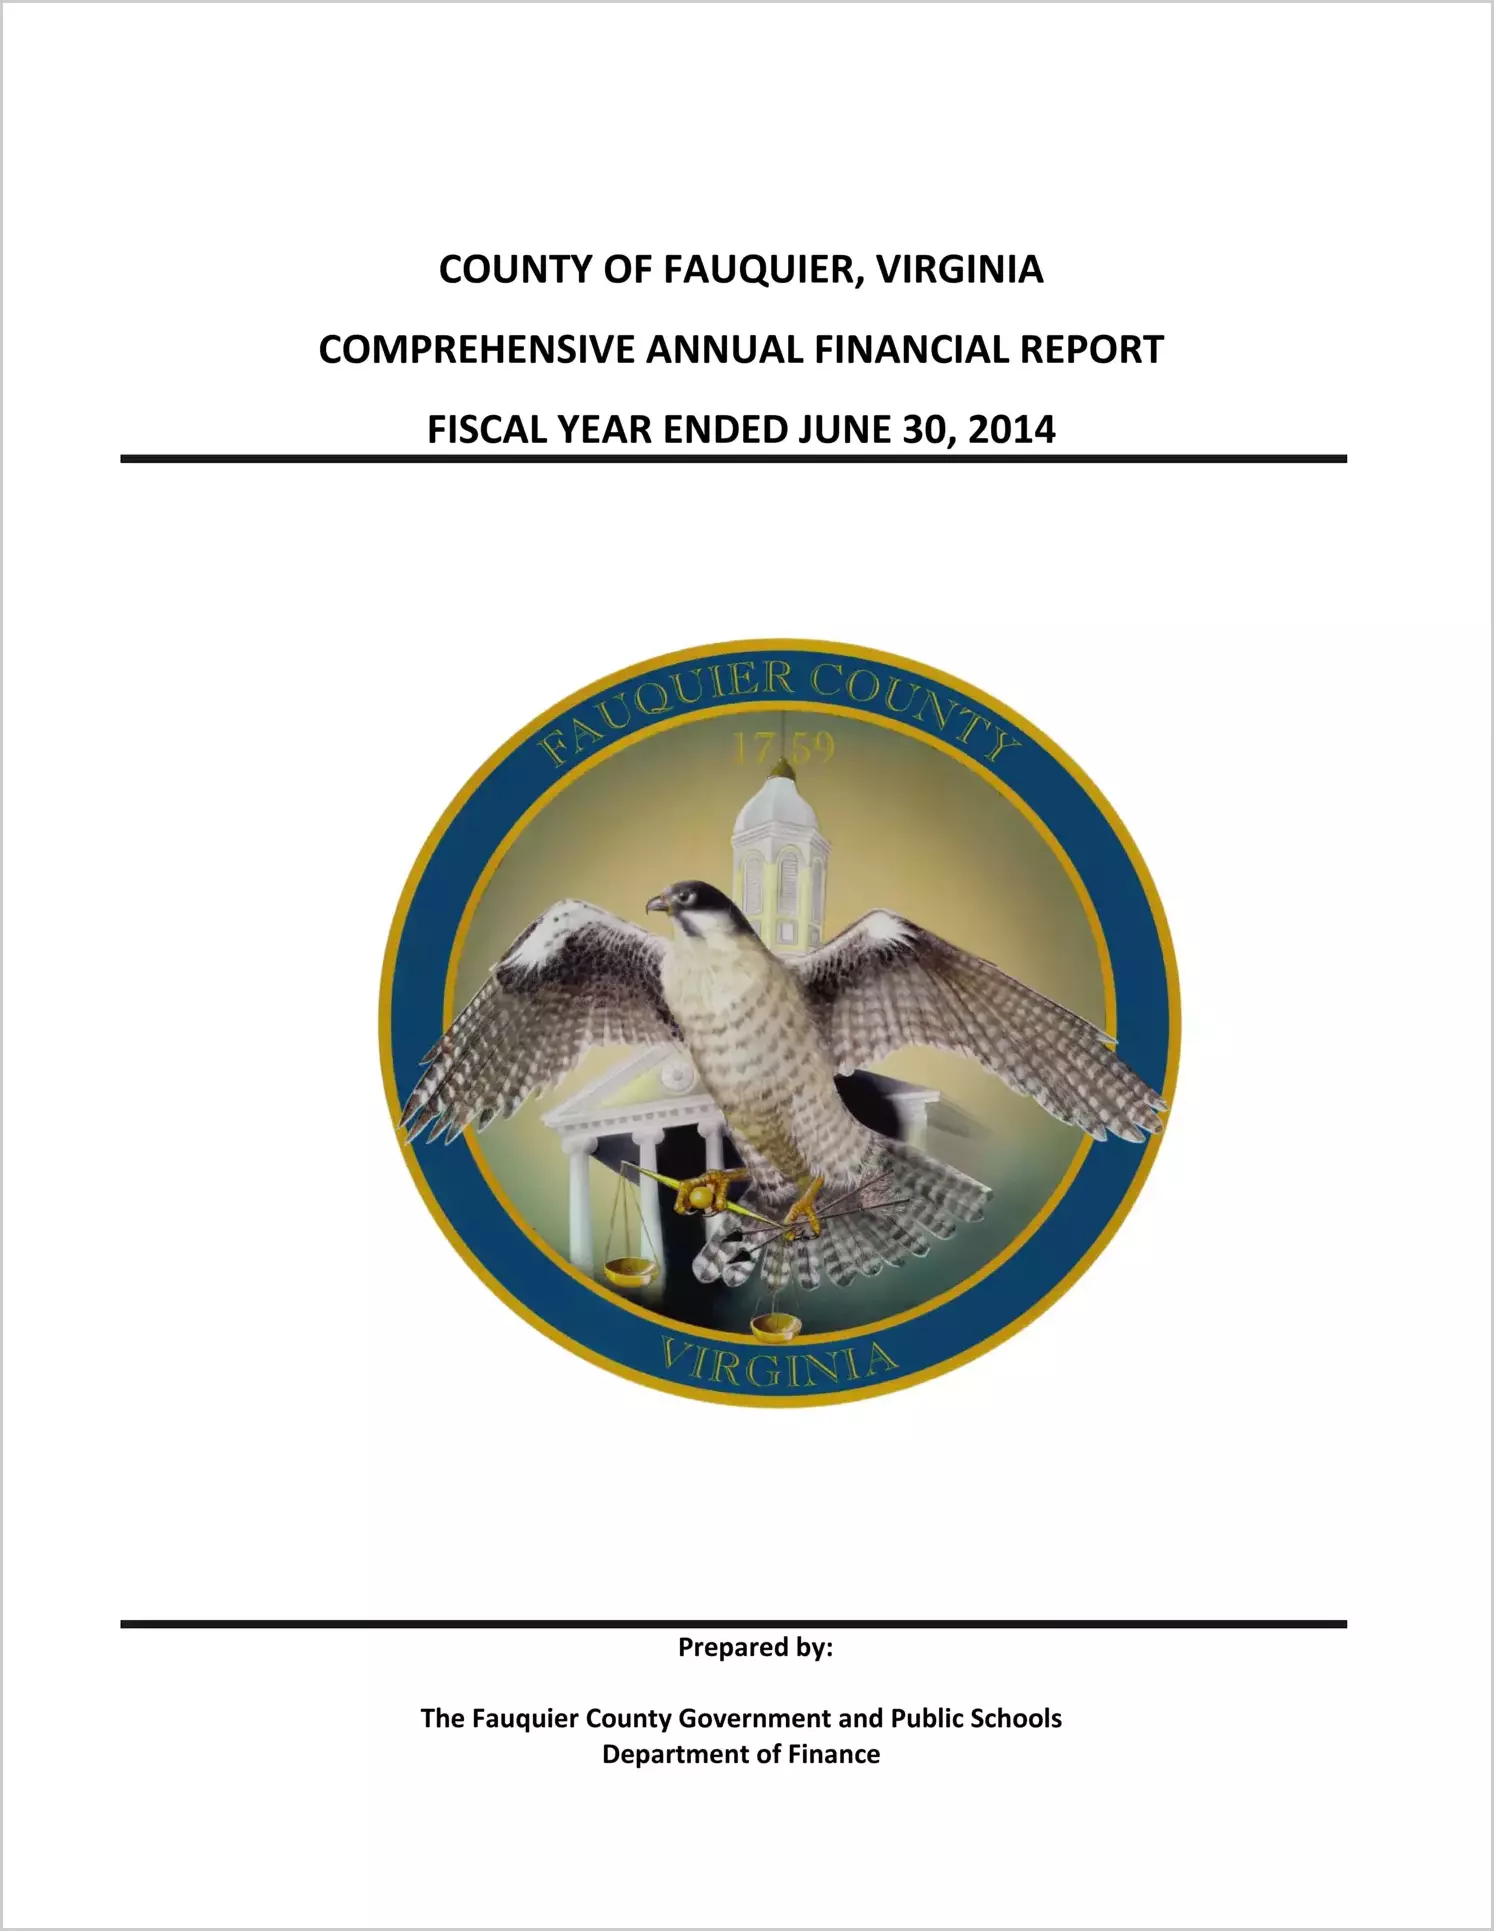 2014 Annual Financial Report for County of Fauquier